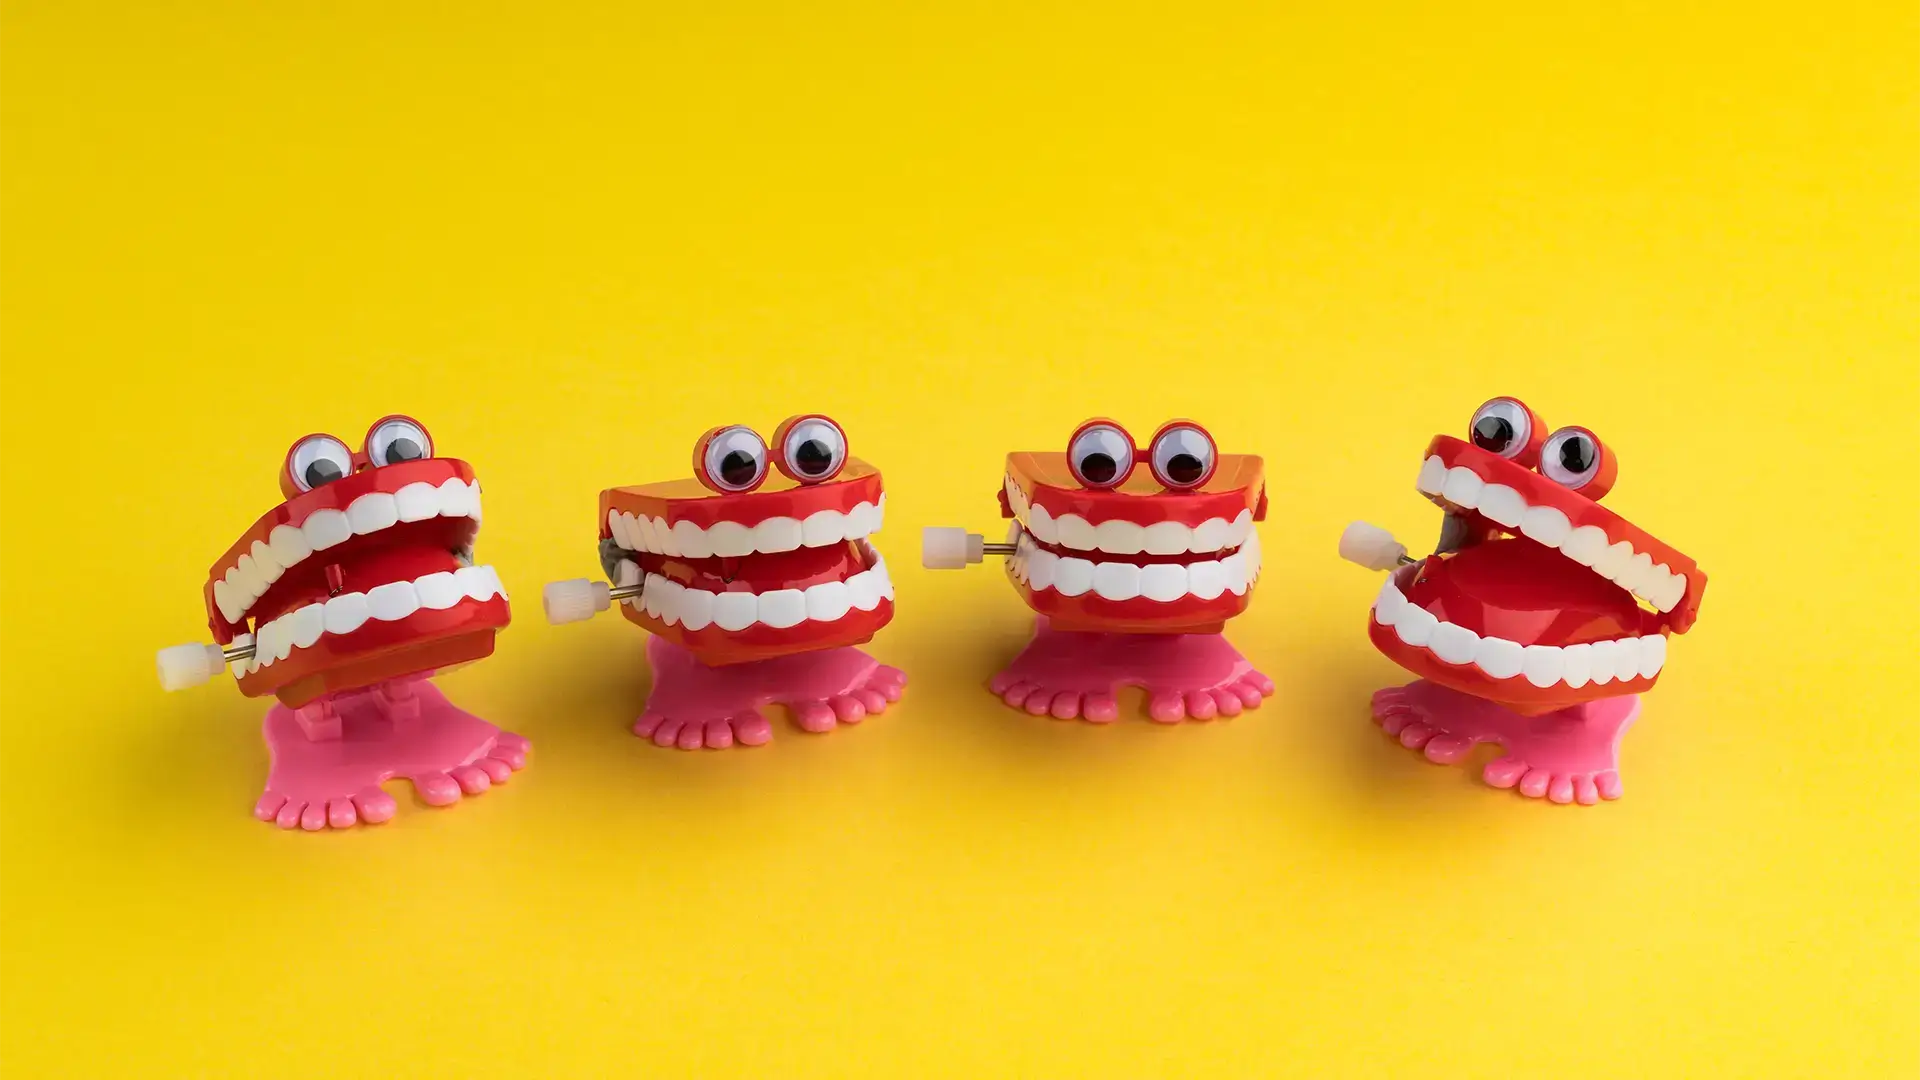 4 sets of fake chattering smiling teeth